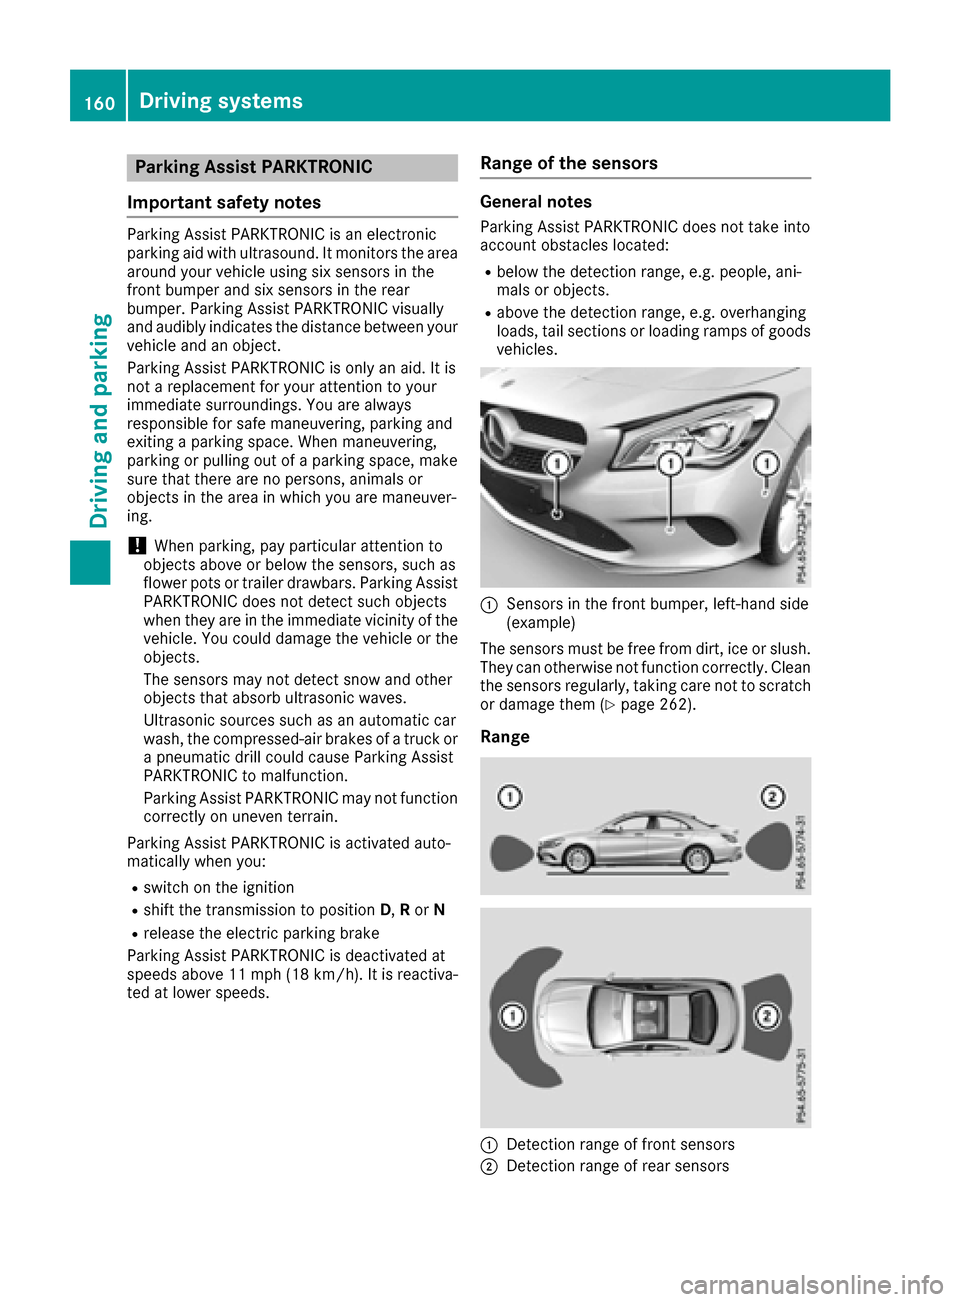 MERCEDES-BENZ CLA-Class 2017 C117 Repair Manual Parking Assist PARKTRONIC
Important safety notes
Parking Assist PARKTRONIC is an electronic
parking aid with ultrasound. It monitors the area
around your vehicle using six sensors in the
front bumper 